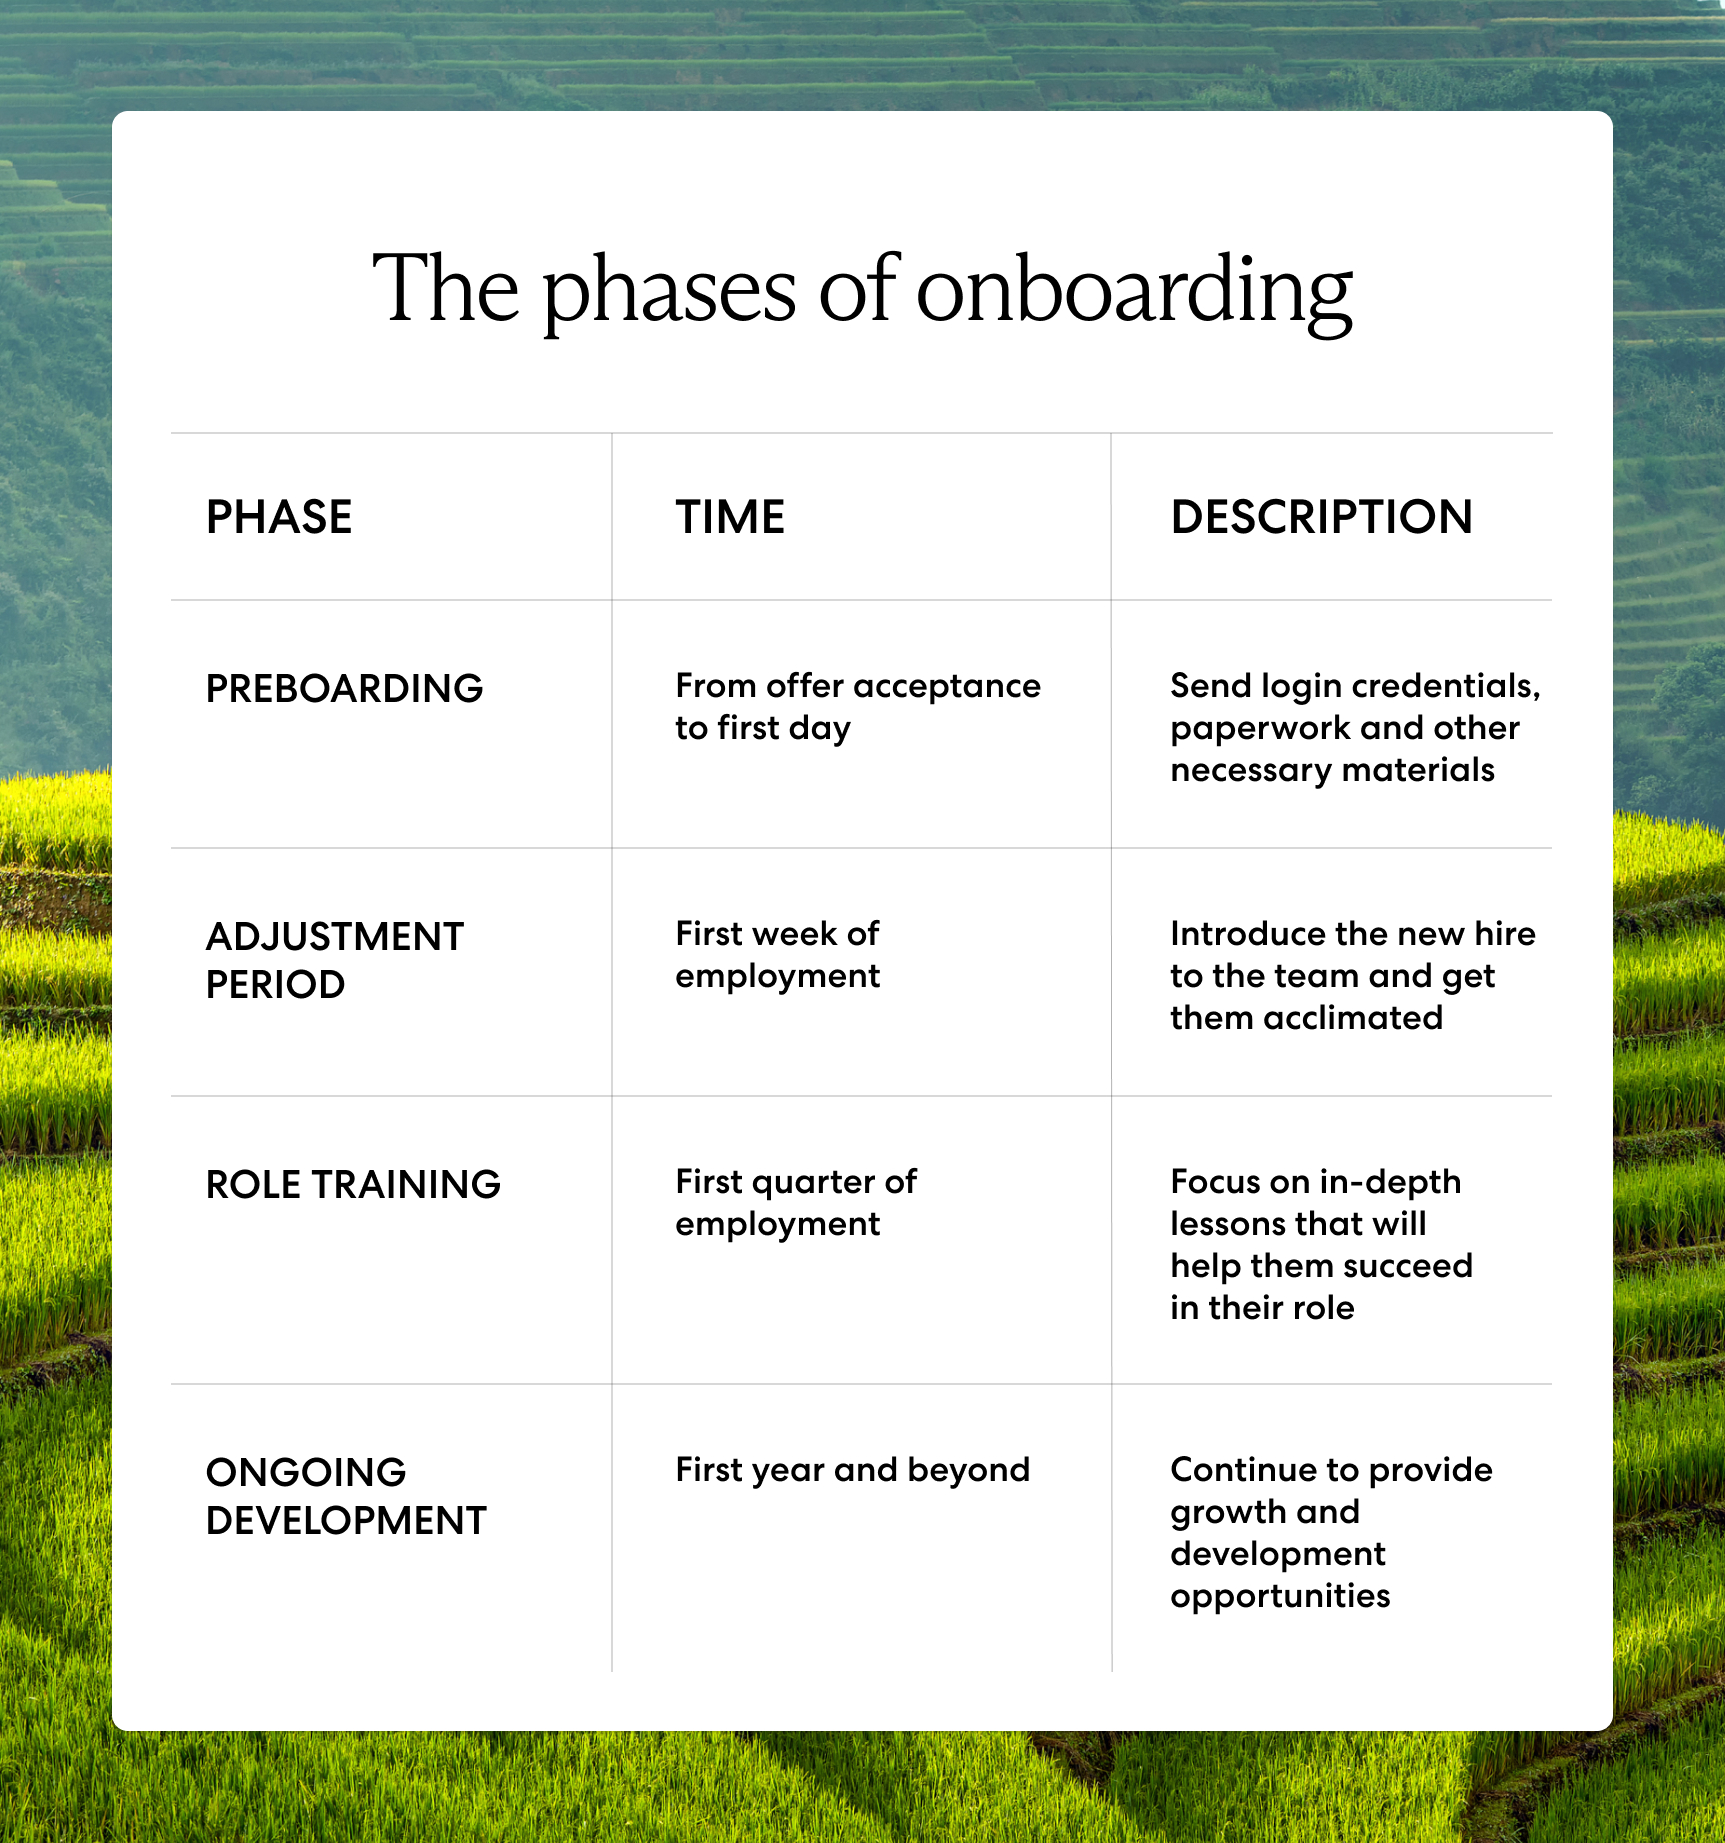 Onboarding has four phases: preboarding, adjustment period, role training, and ongoing development